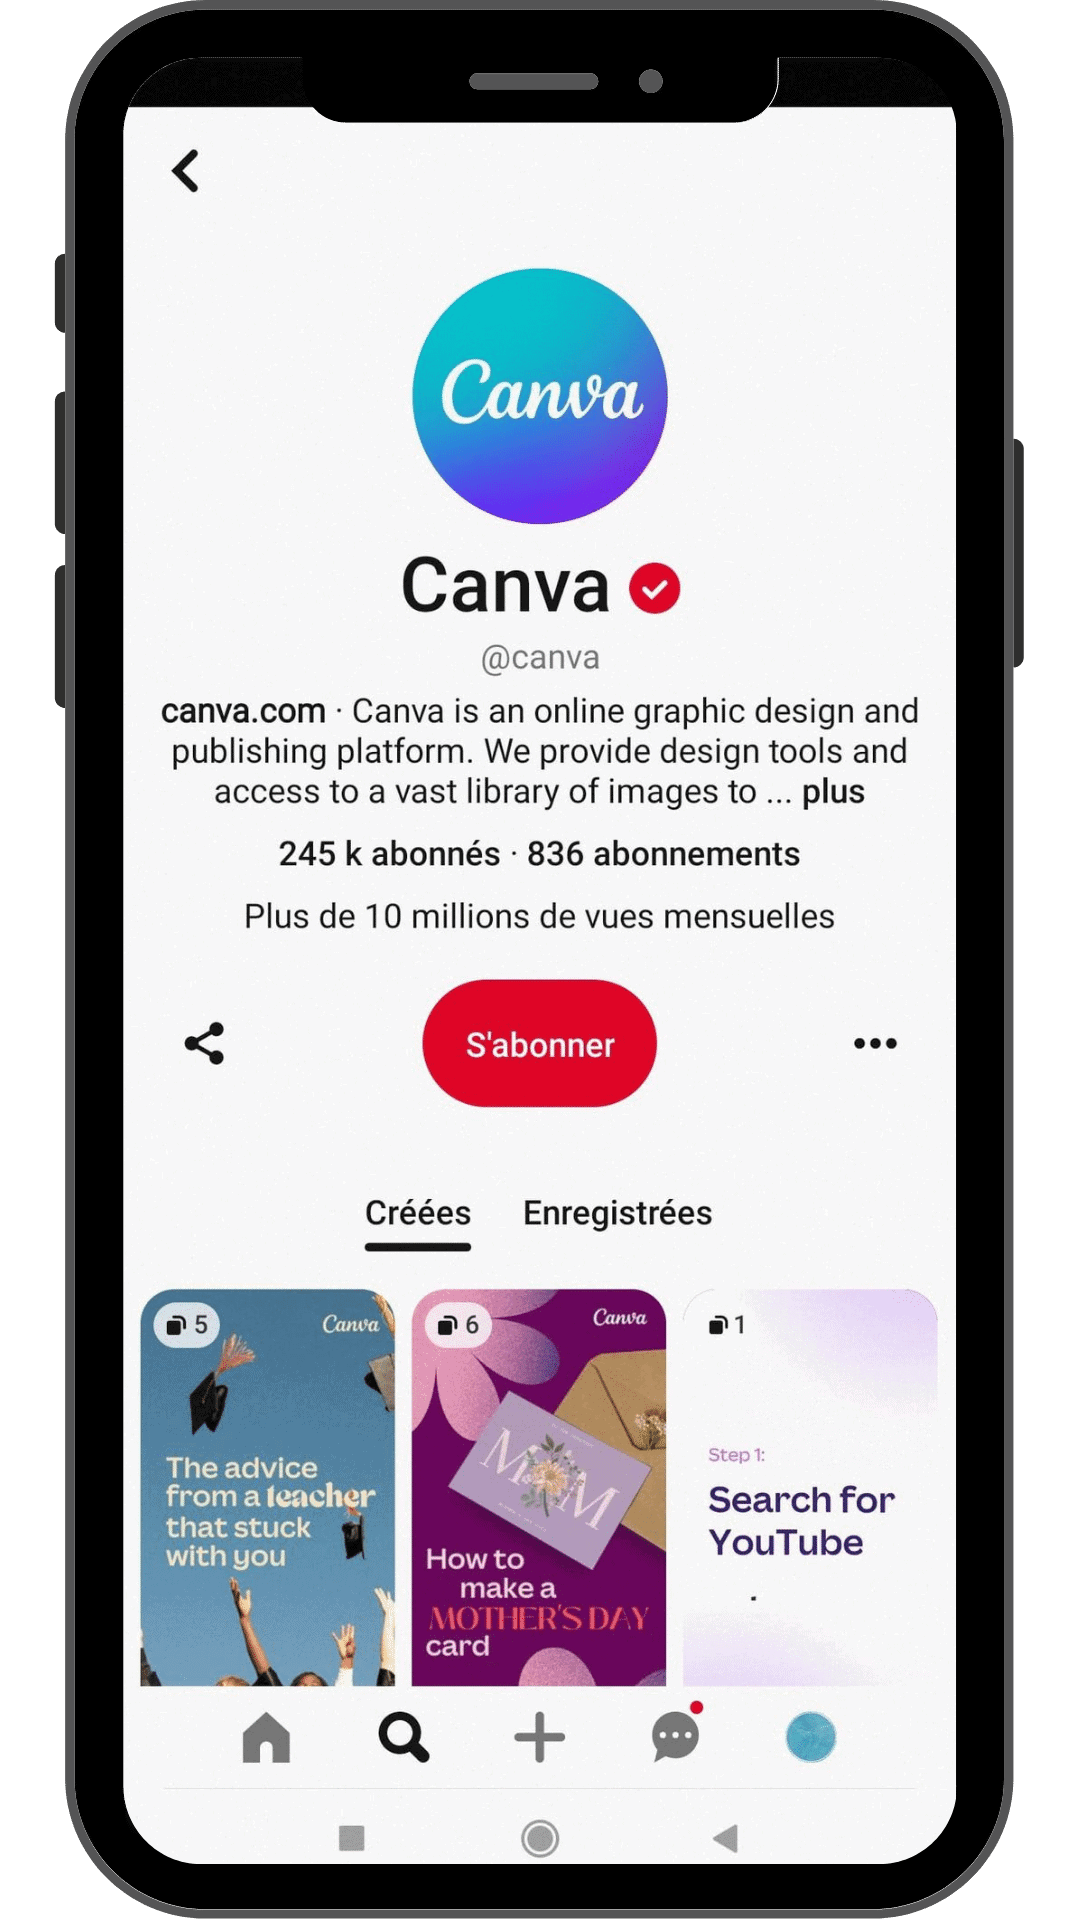 canva.com Canva is an online graphic design and publishing platform. We provide design tools and access to a vast library of images to ... plus